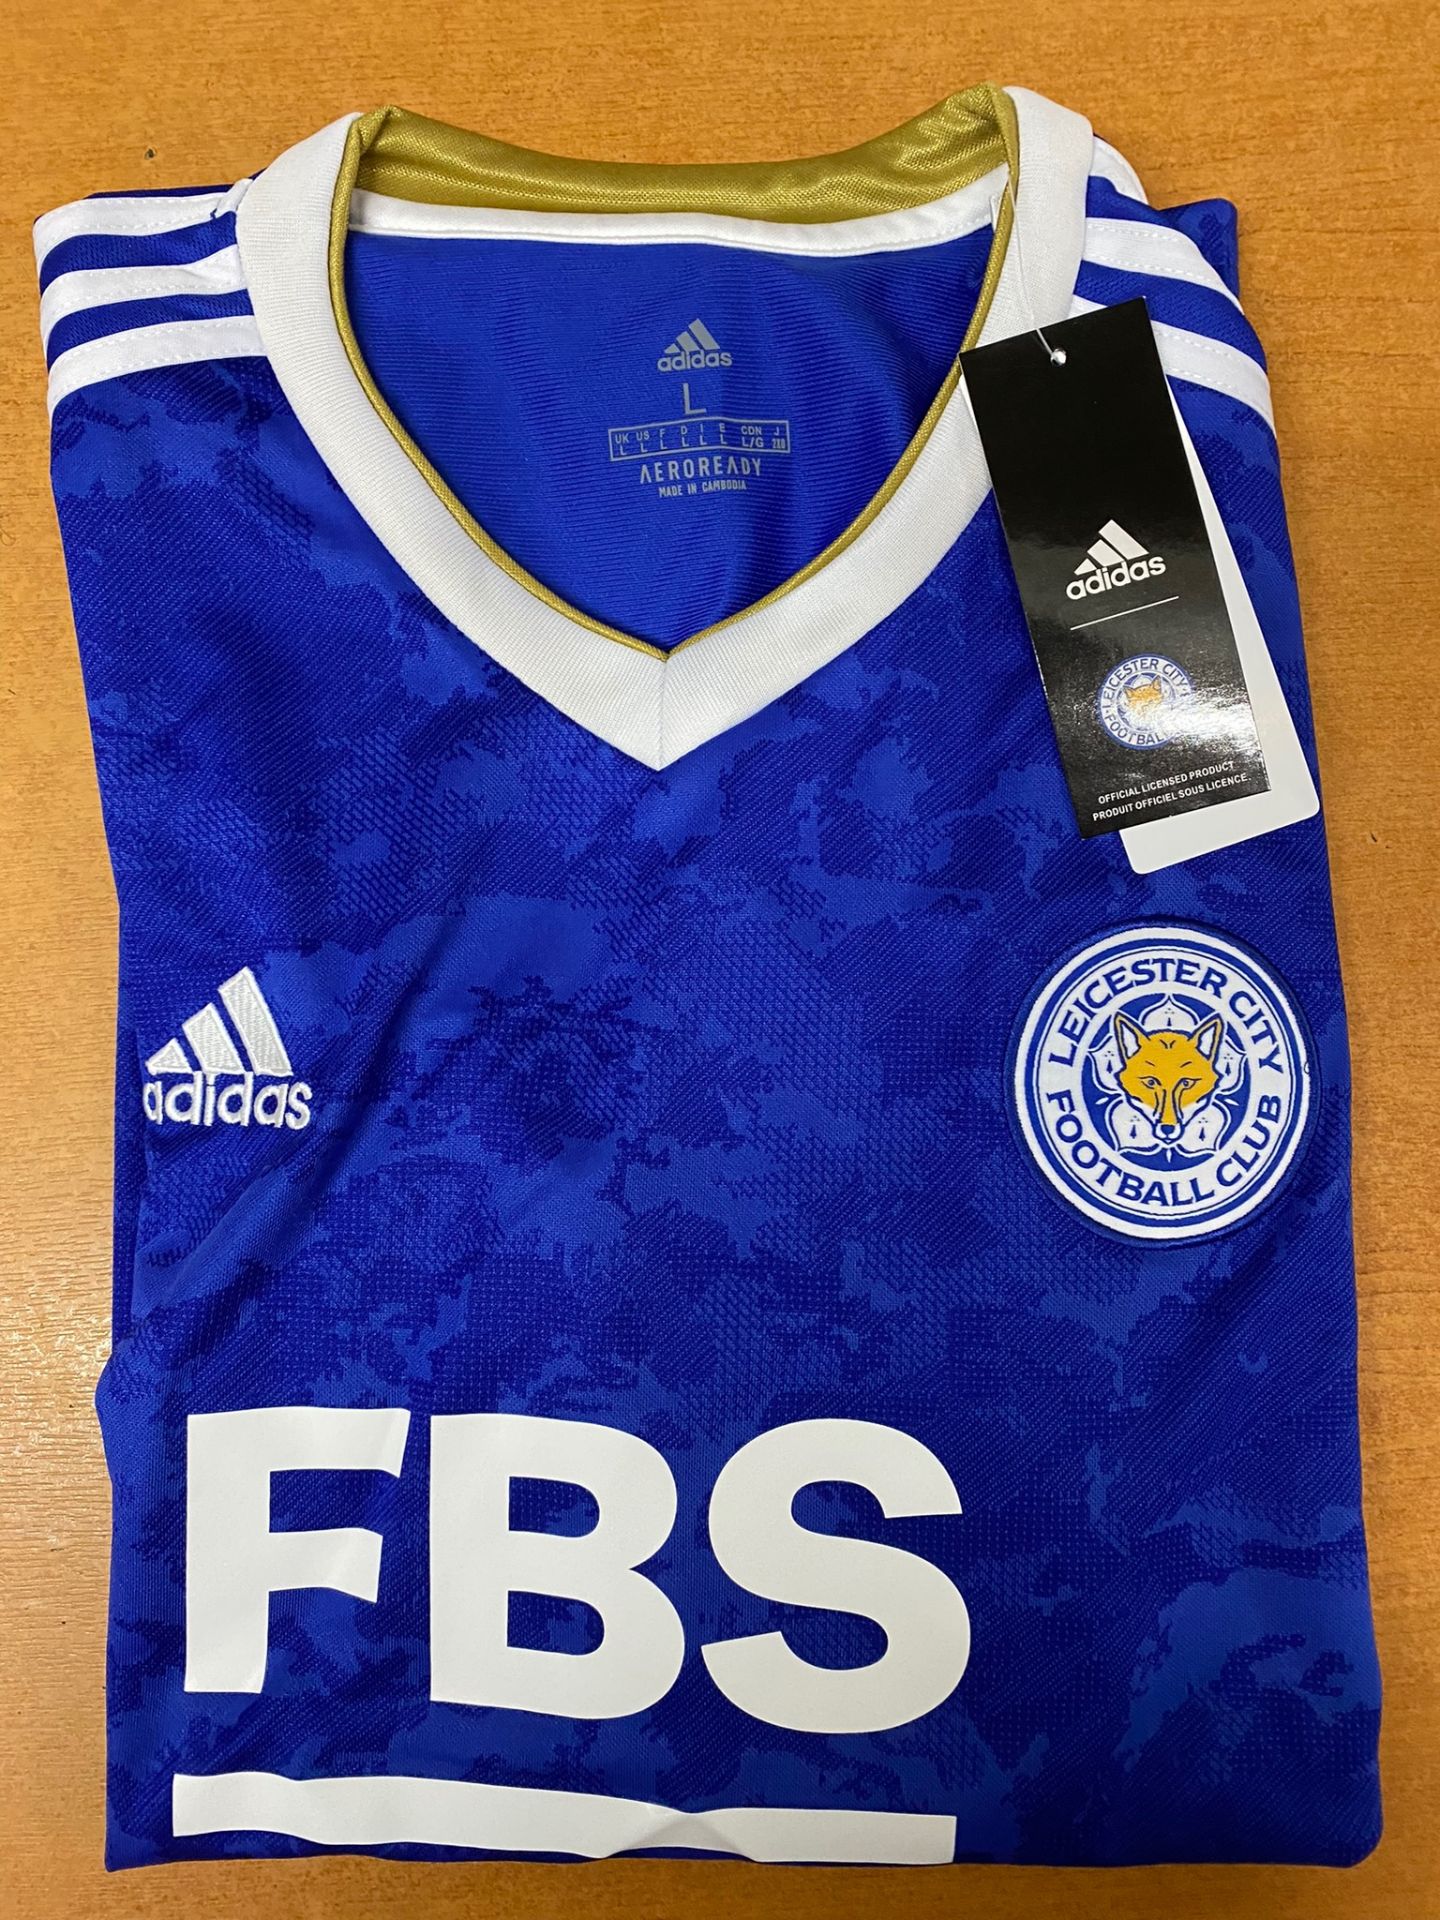 Brendan Rodgers Leicester City Signed Football Shirt - Image 2 of 3